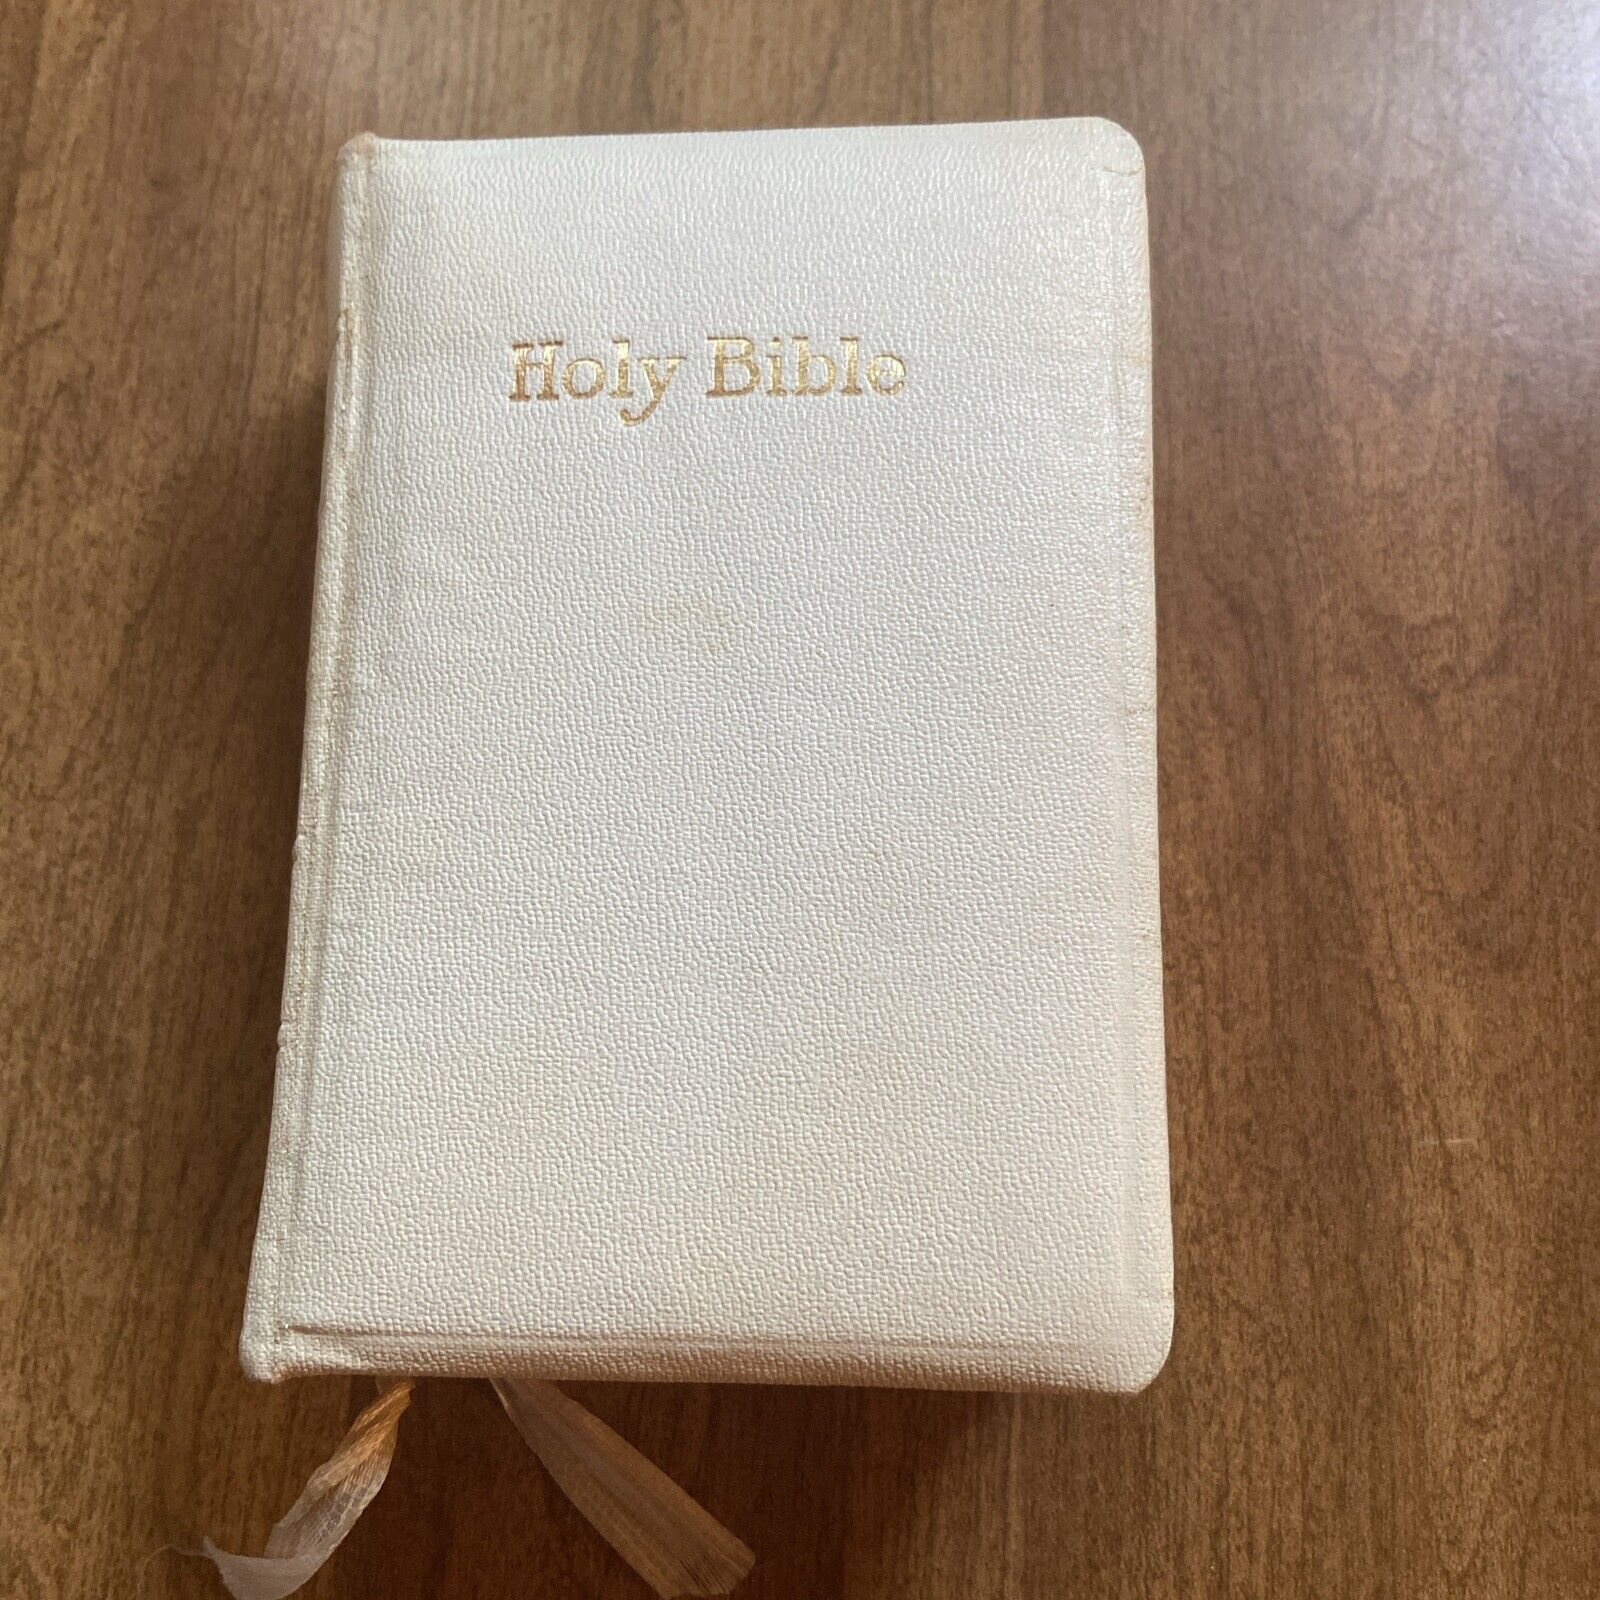 Holy Bible Kimg James Or Authorized Version Vintage 